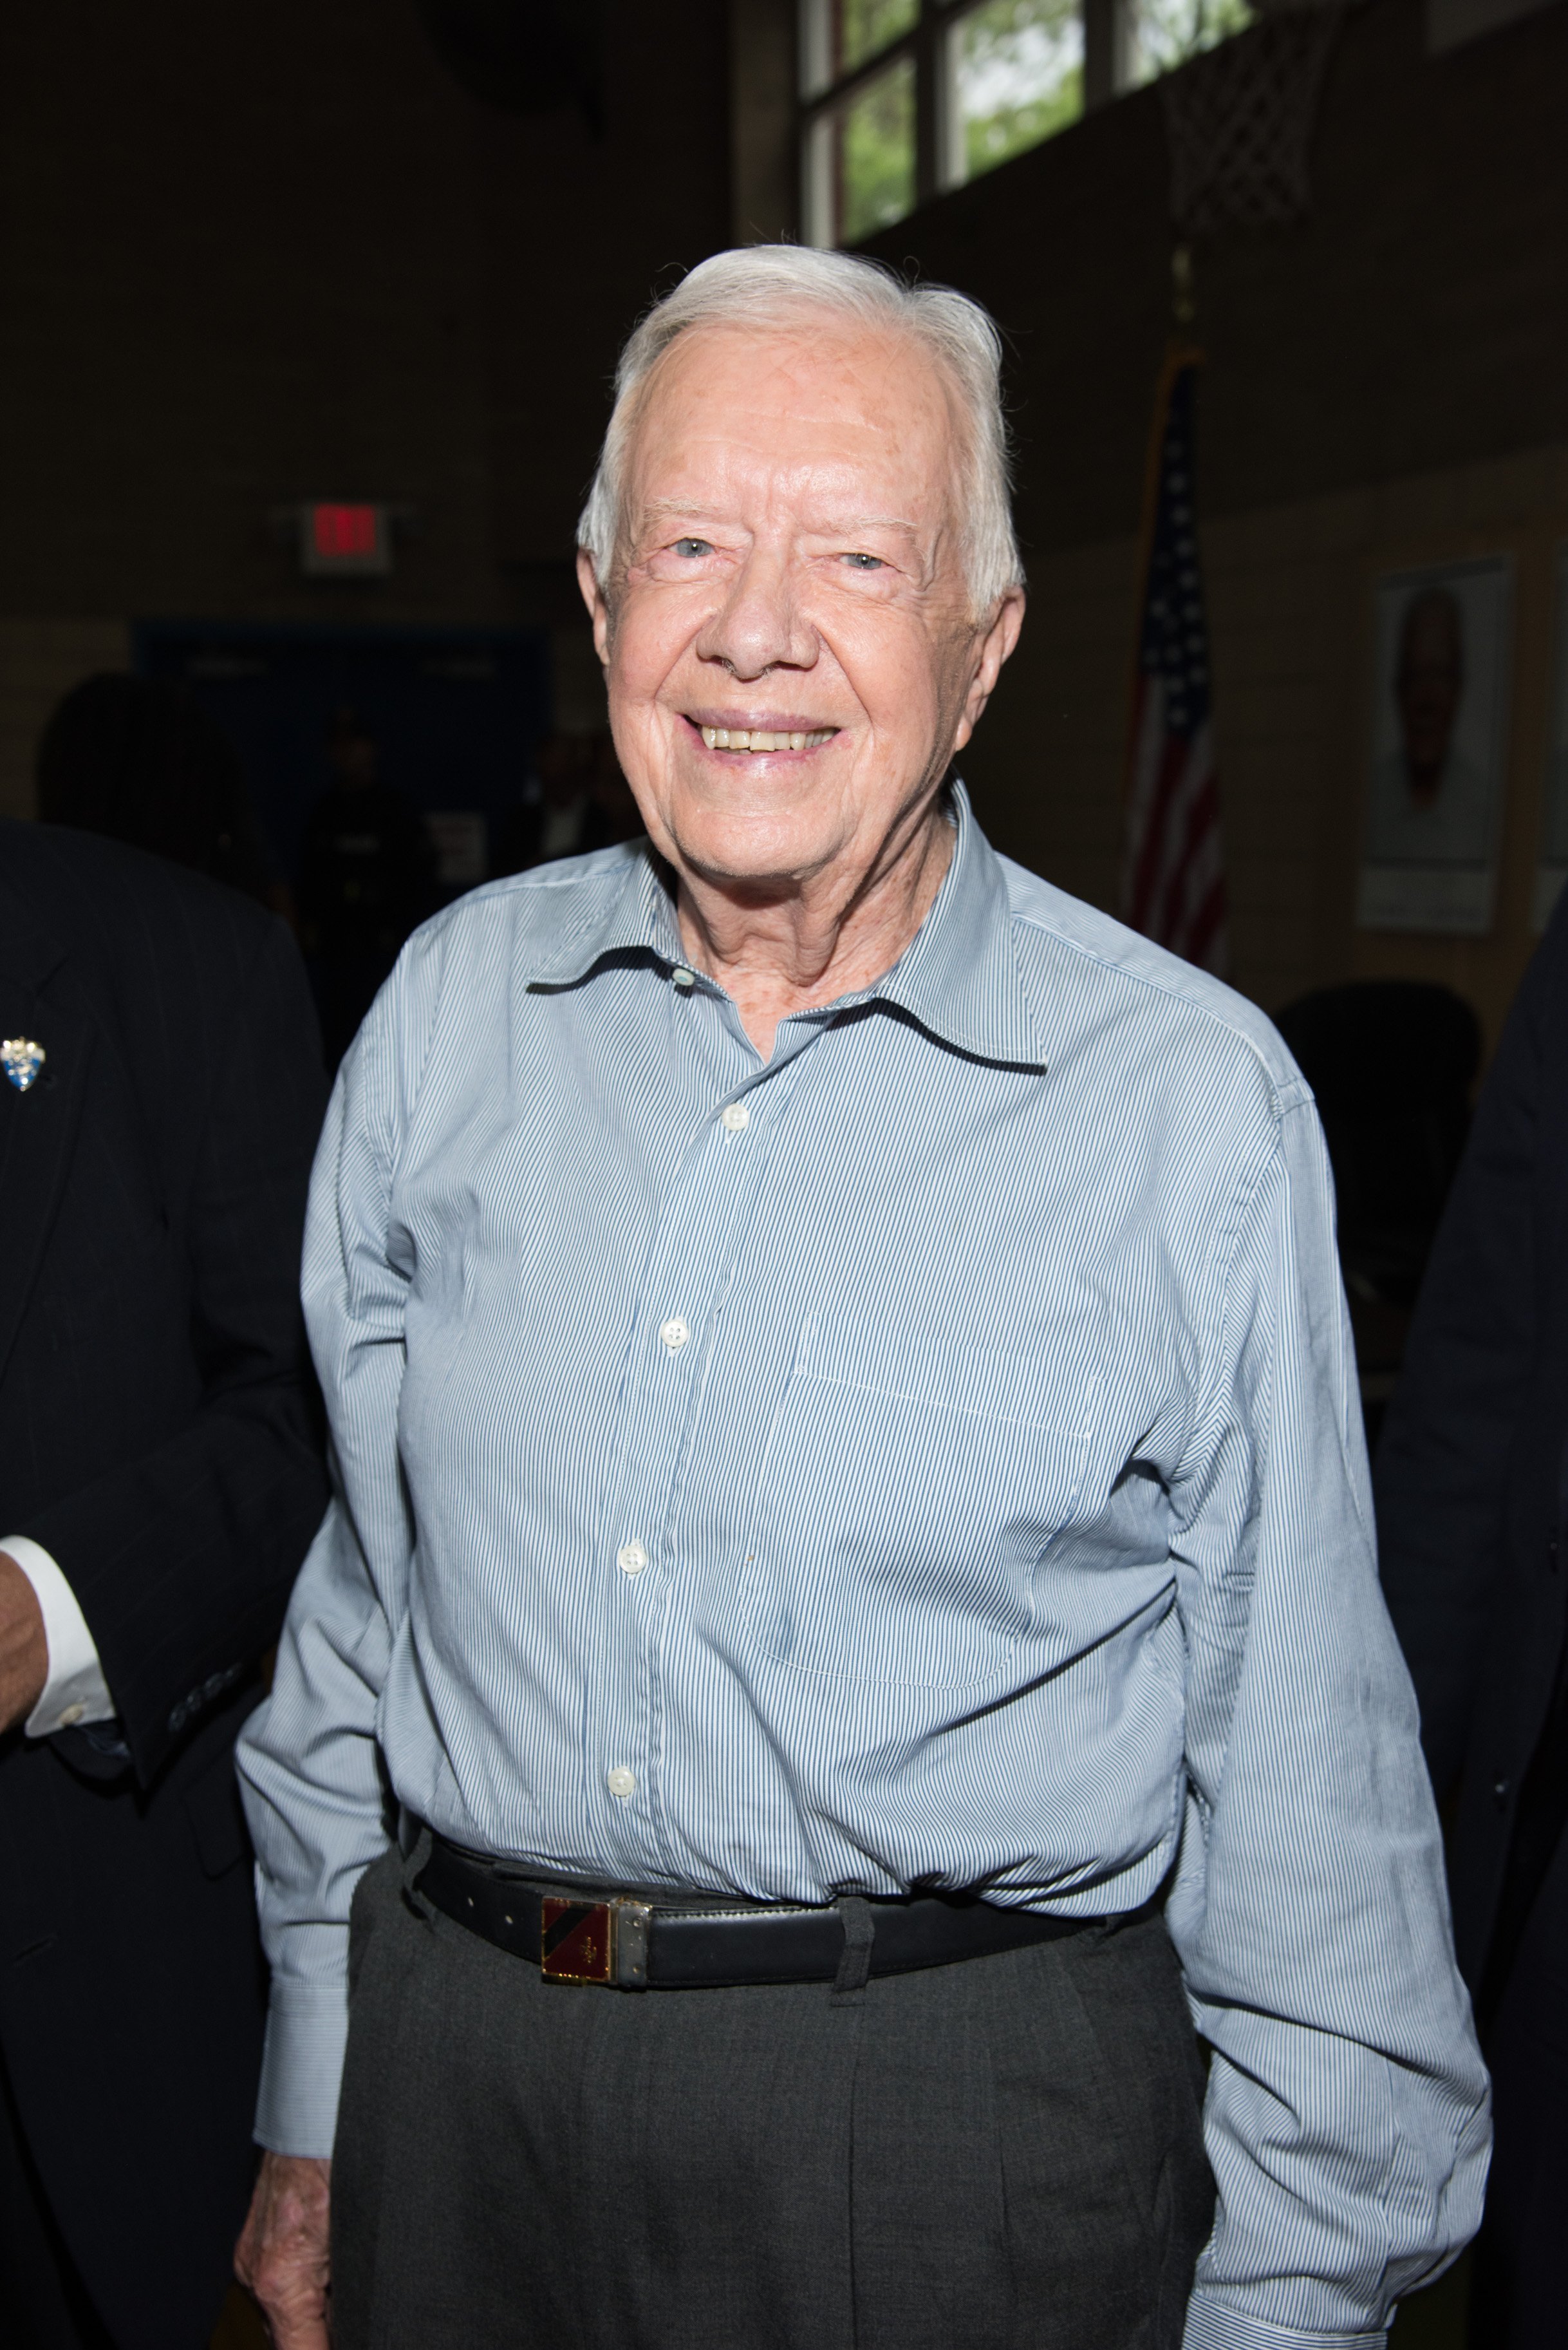 Jimmy Carter signs copies of "A Full Life Reflections At Ninety" at Bookends Bookstore on July 8, 2015, in Ridgewood, New Jersey. | Source: Getty Images.